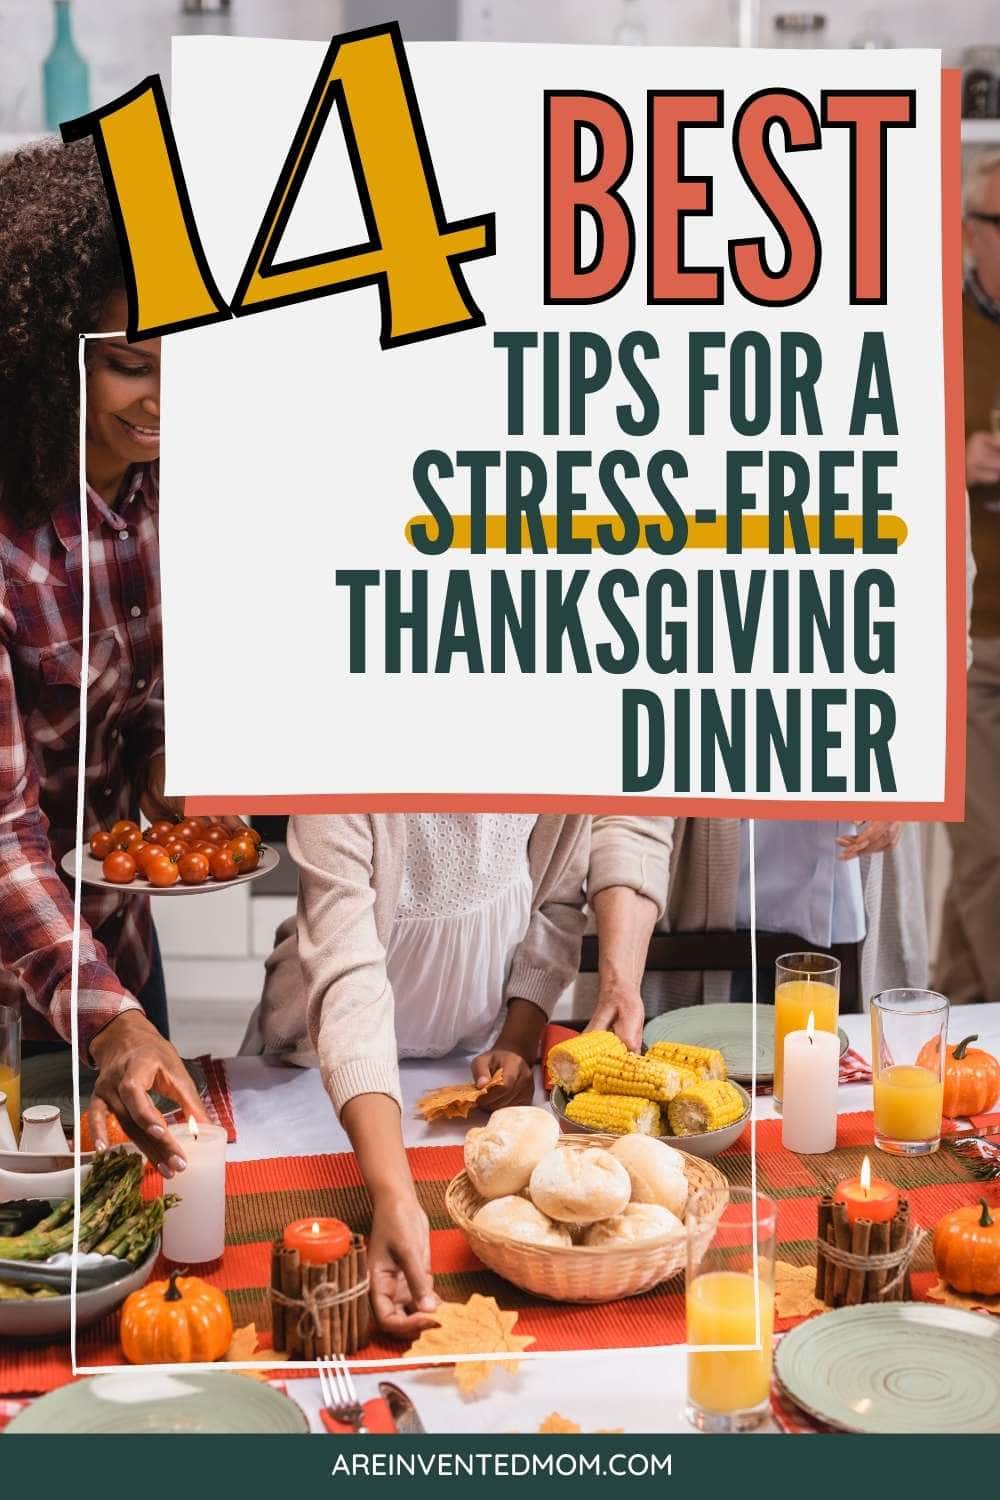 14 Tips for a Stress-Free Thanksgiving Dinner | A Reinvented Mom